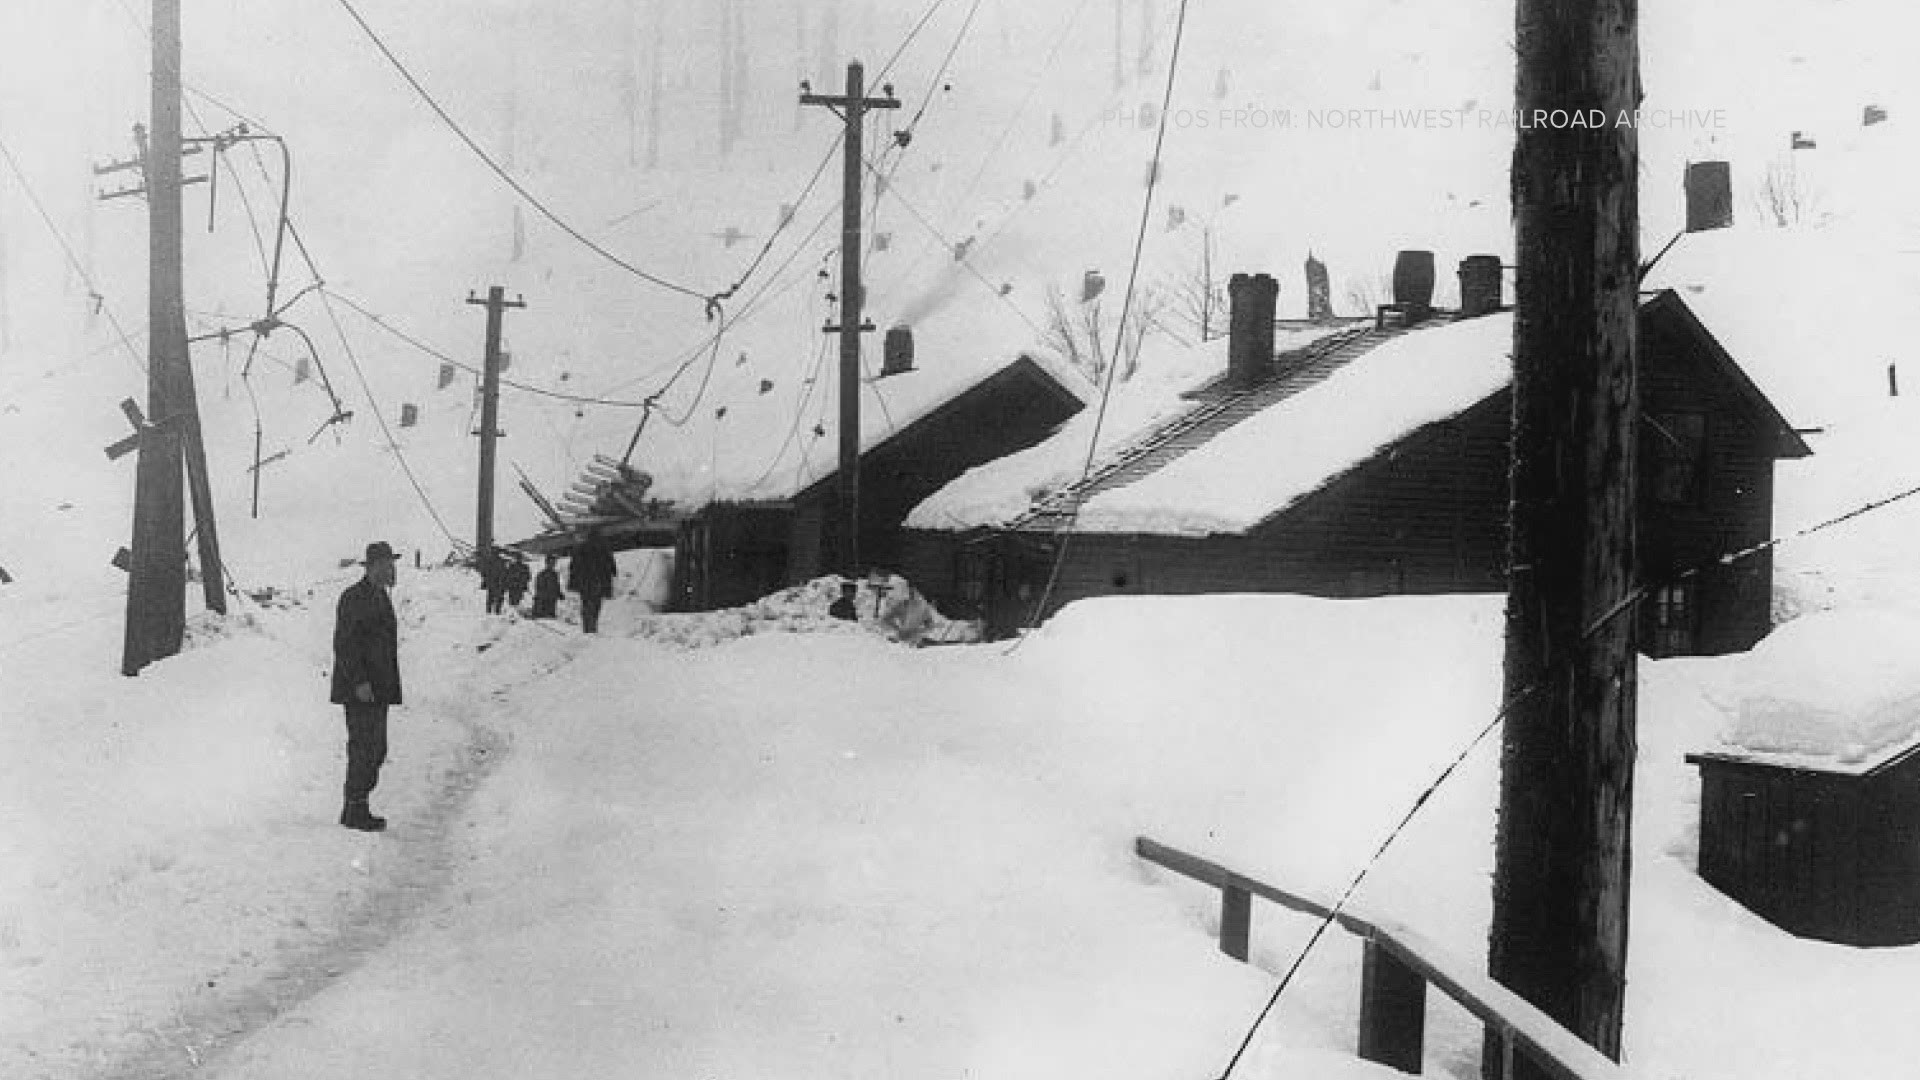 A blizzard gave way to rain causing an avalanche in Wellington, WA that killed 96 people on March 1st, 1910.